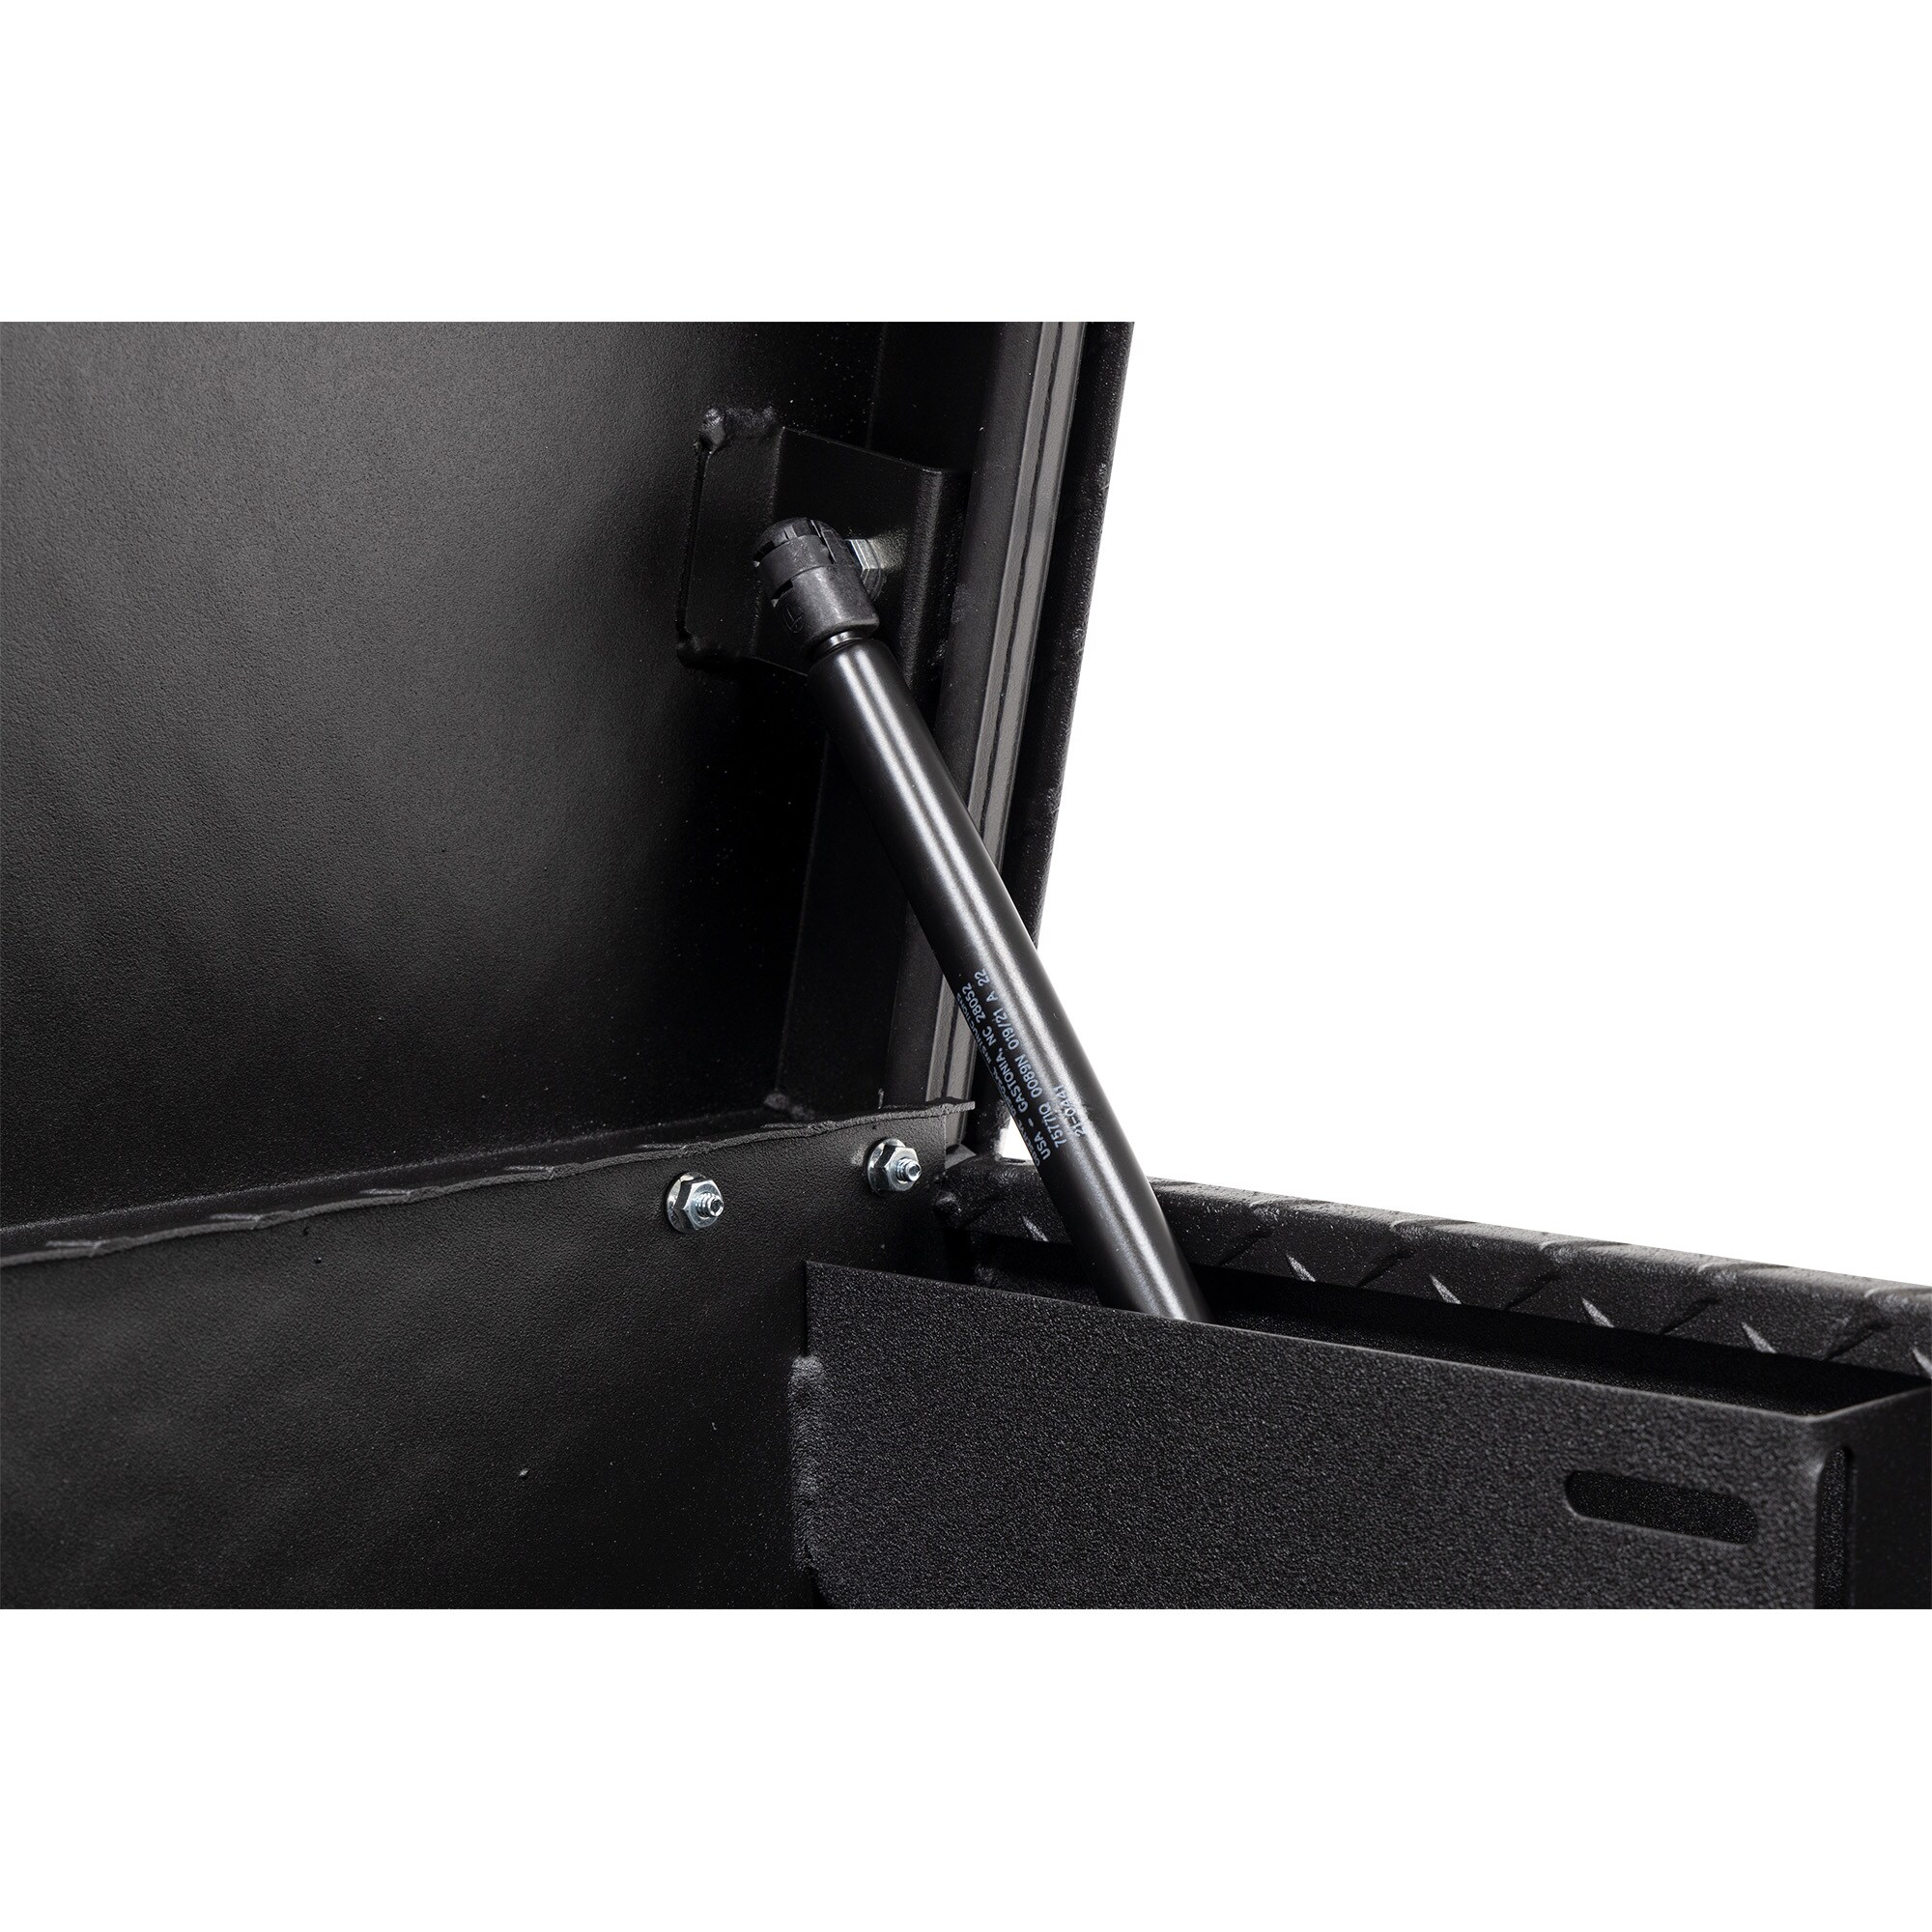 WEATHER GUARD 56.25-in x 16.5-in x 13-in Textured Matte Black